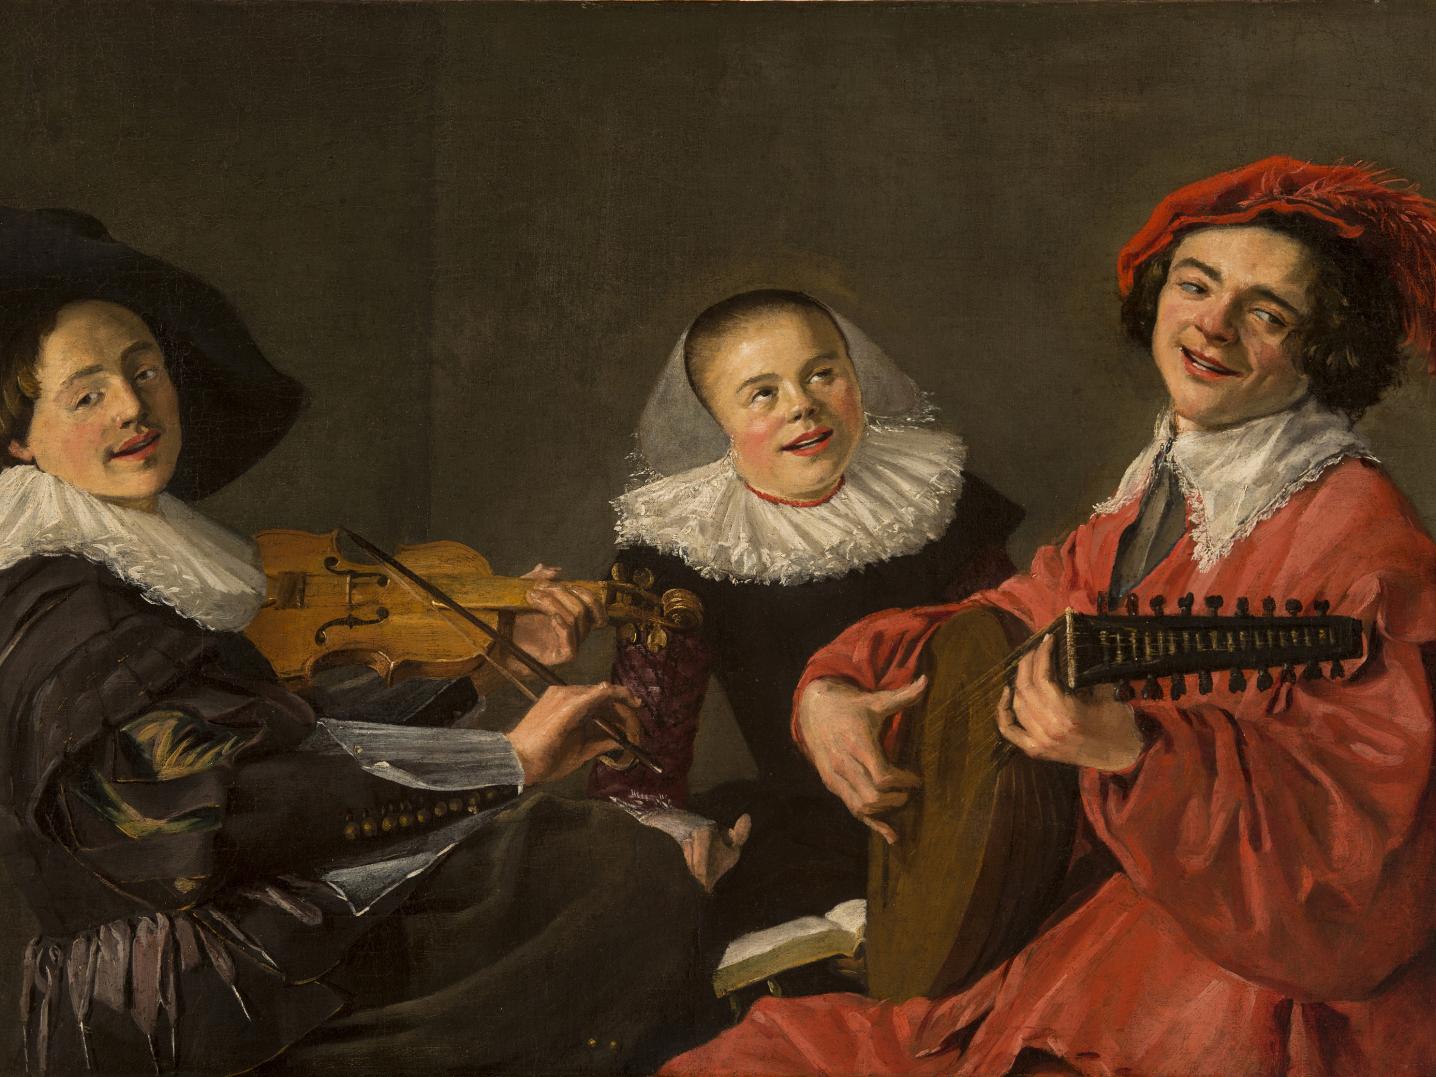 A 17th century painting of three musicians playing a lute, a violin and a drum.